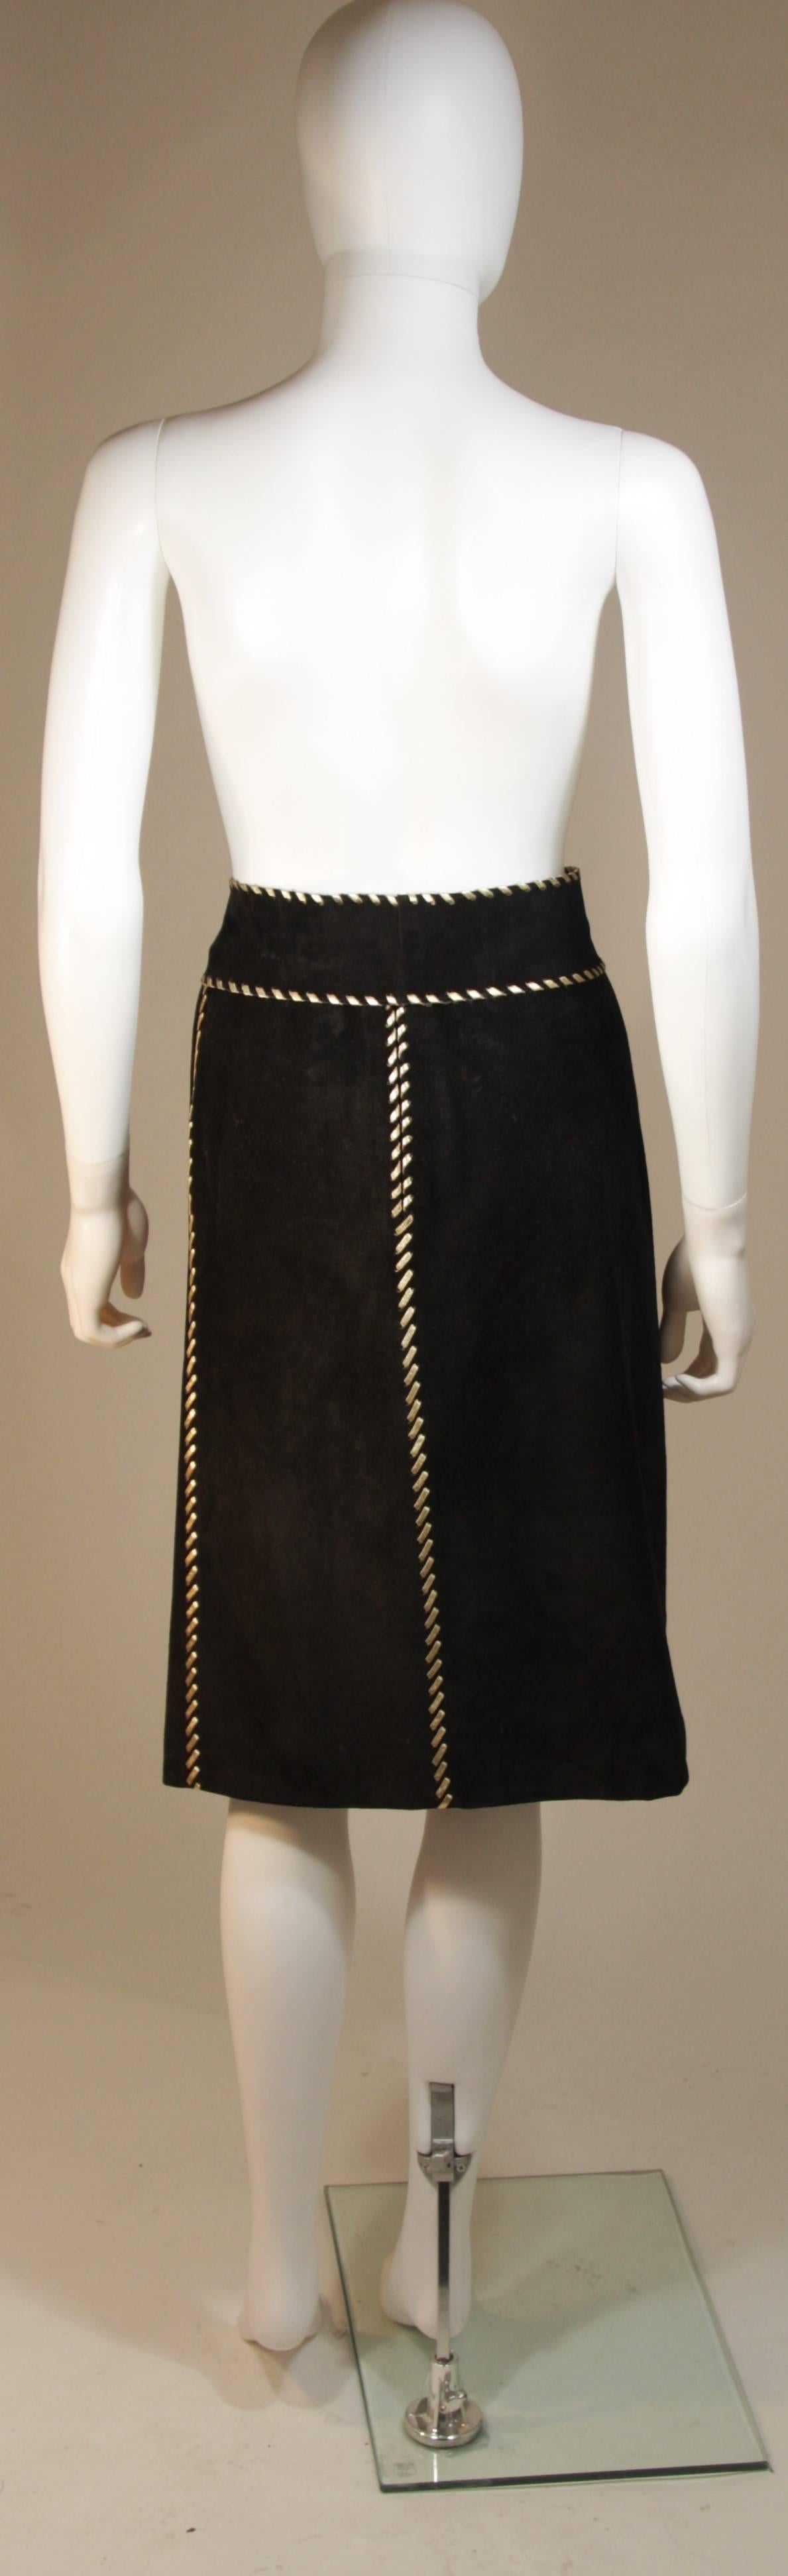 YVES SAINT LAURENT Black Suede Skirt with Gold Detail and Belt Size 36 In Excellent Condition For Sale In Los Angeles, CA